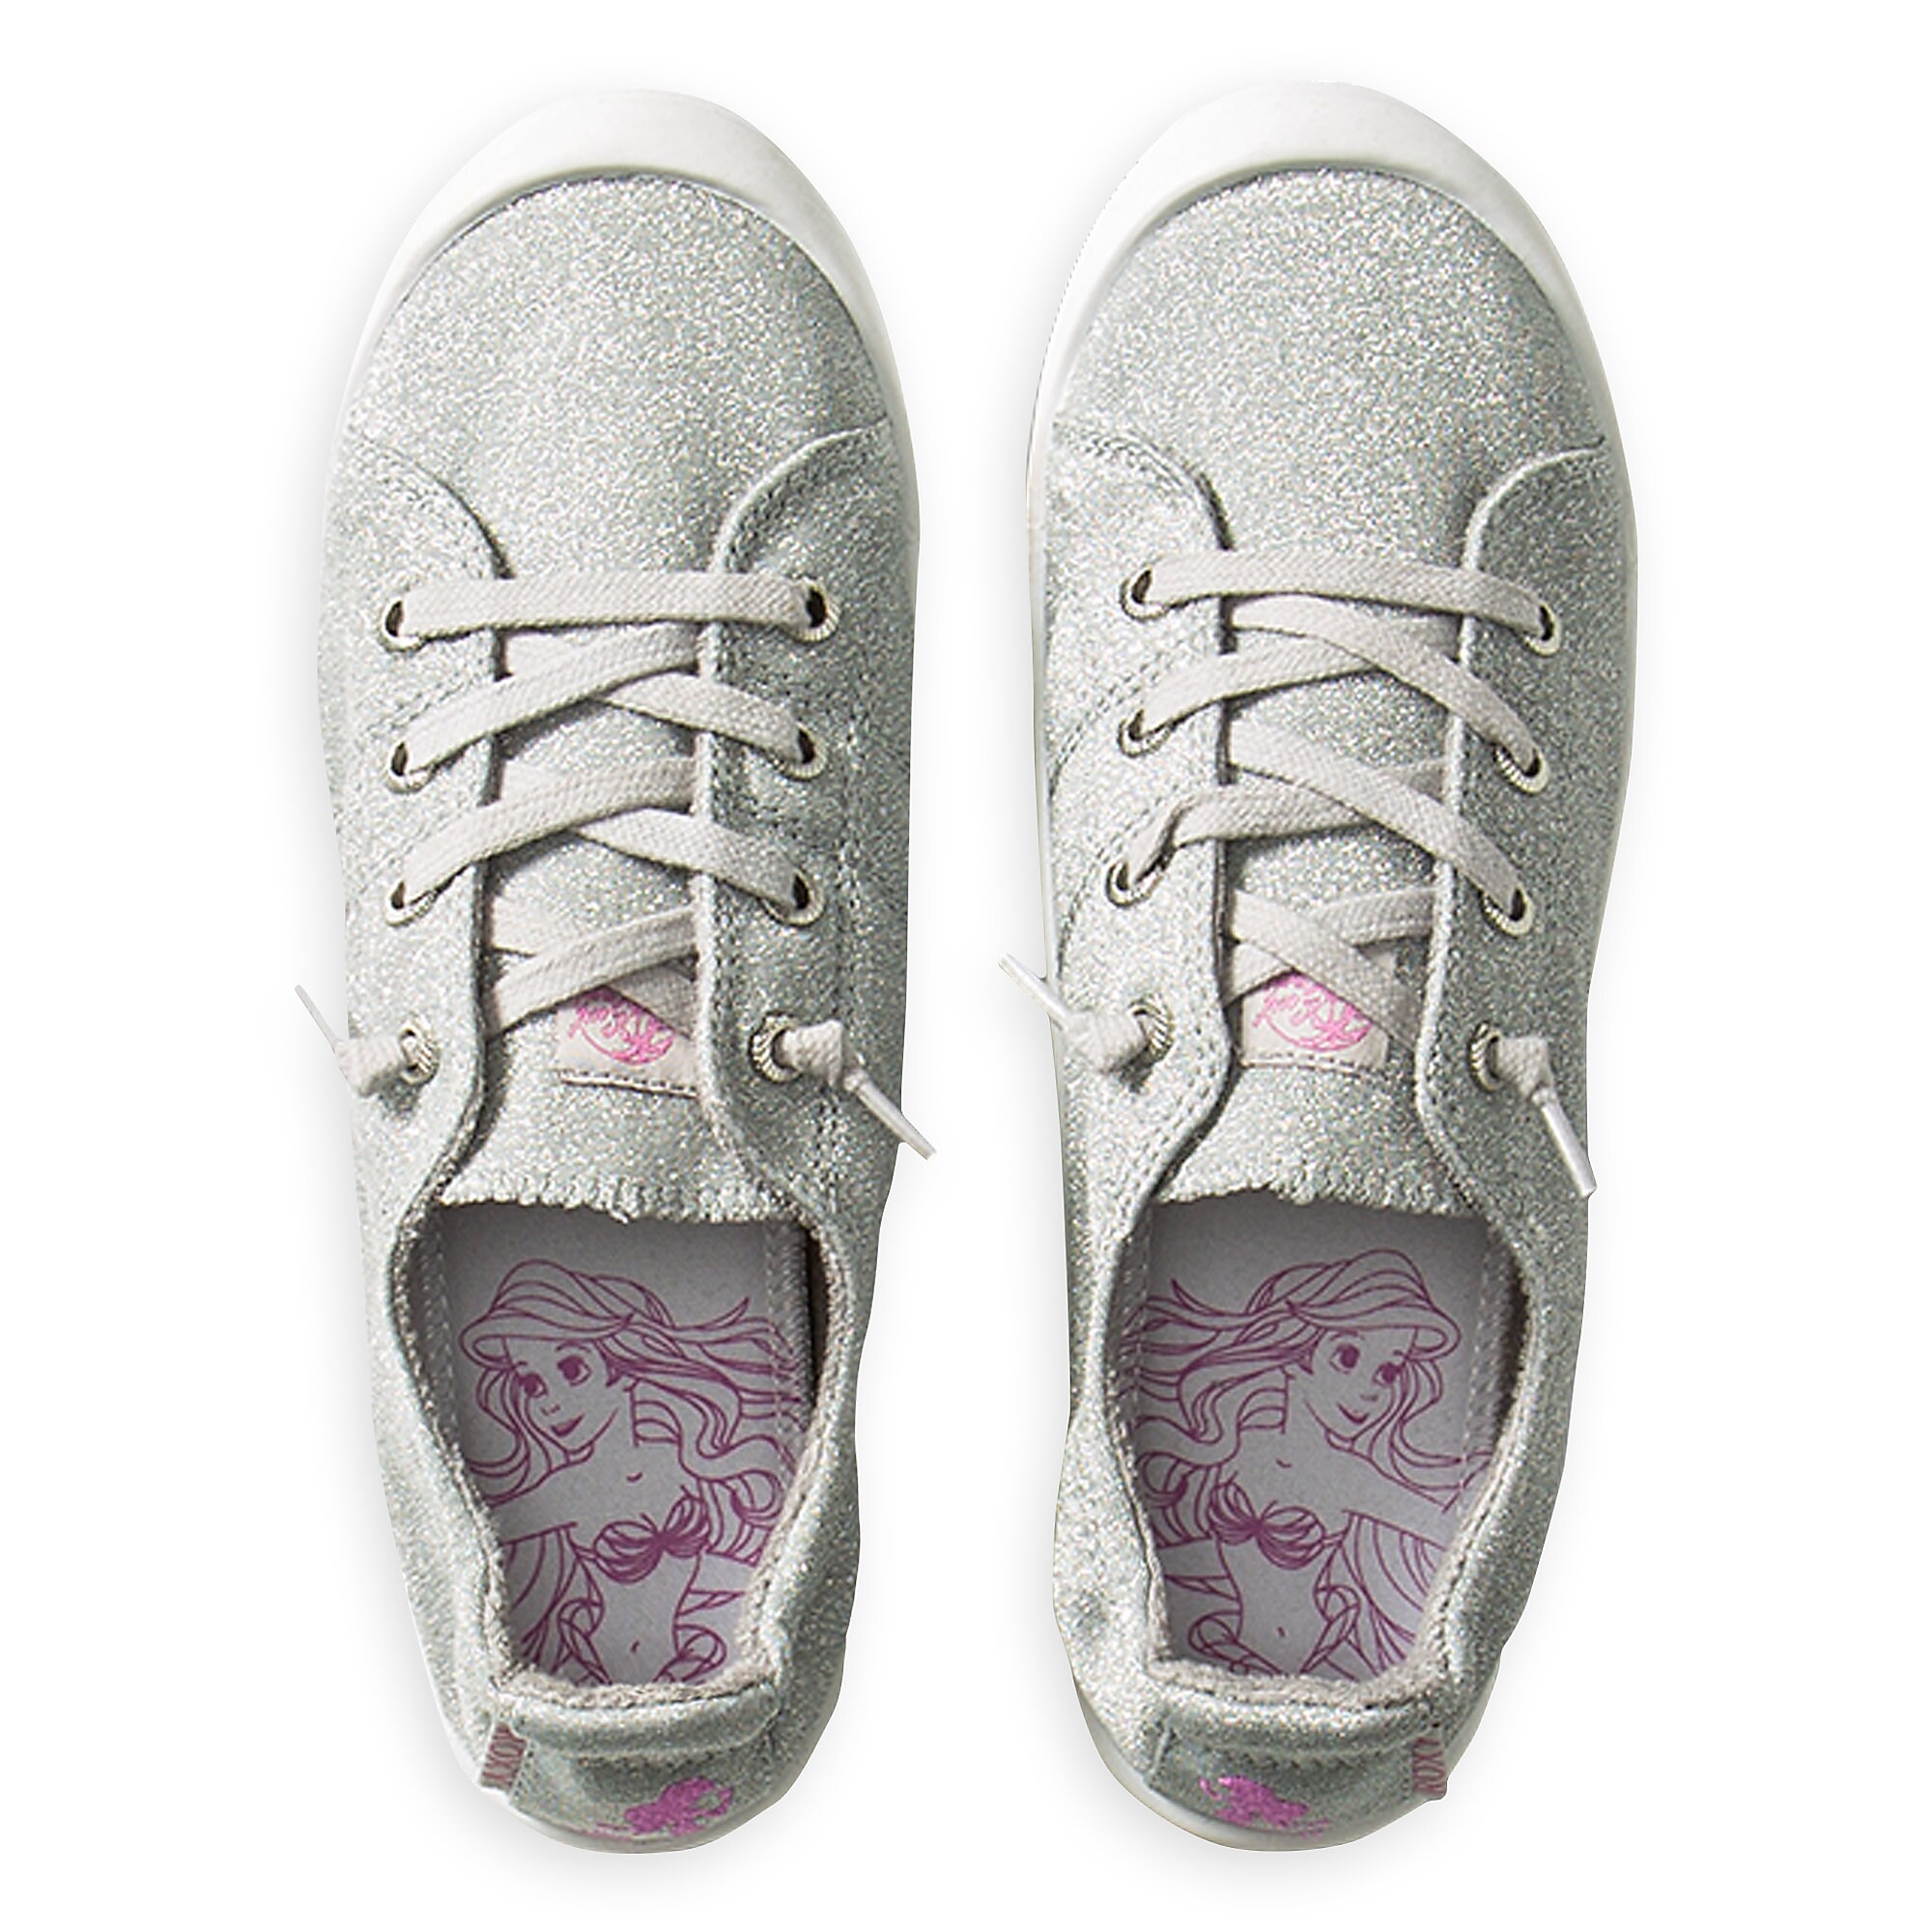 The Little Mermaid Canvas Shoes for Girls by ROXY Girl - Silver